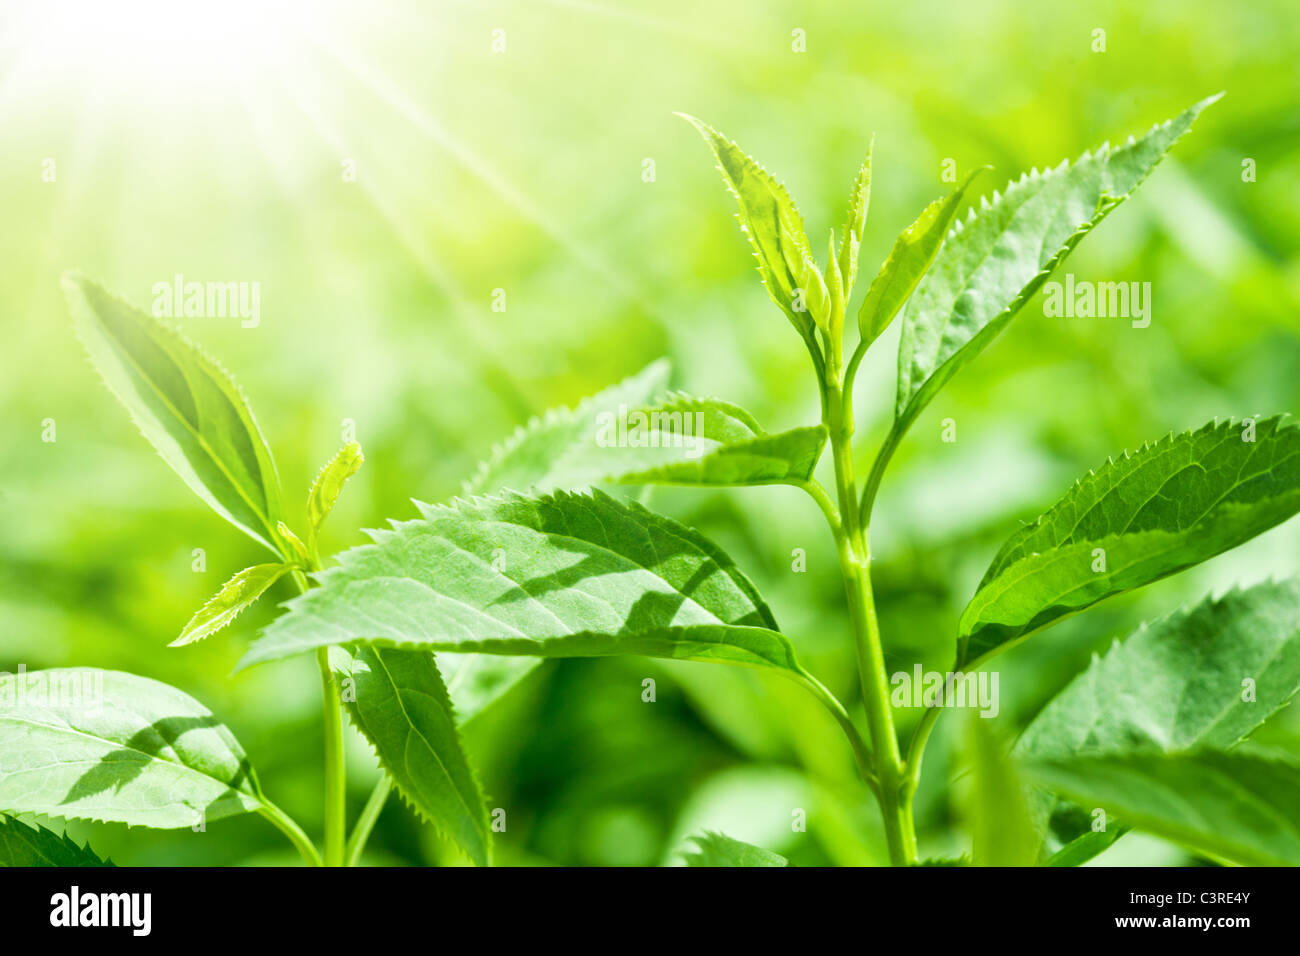 Tea leaves at a plantation in the beams of sunlight. Stock Photo